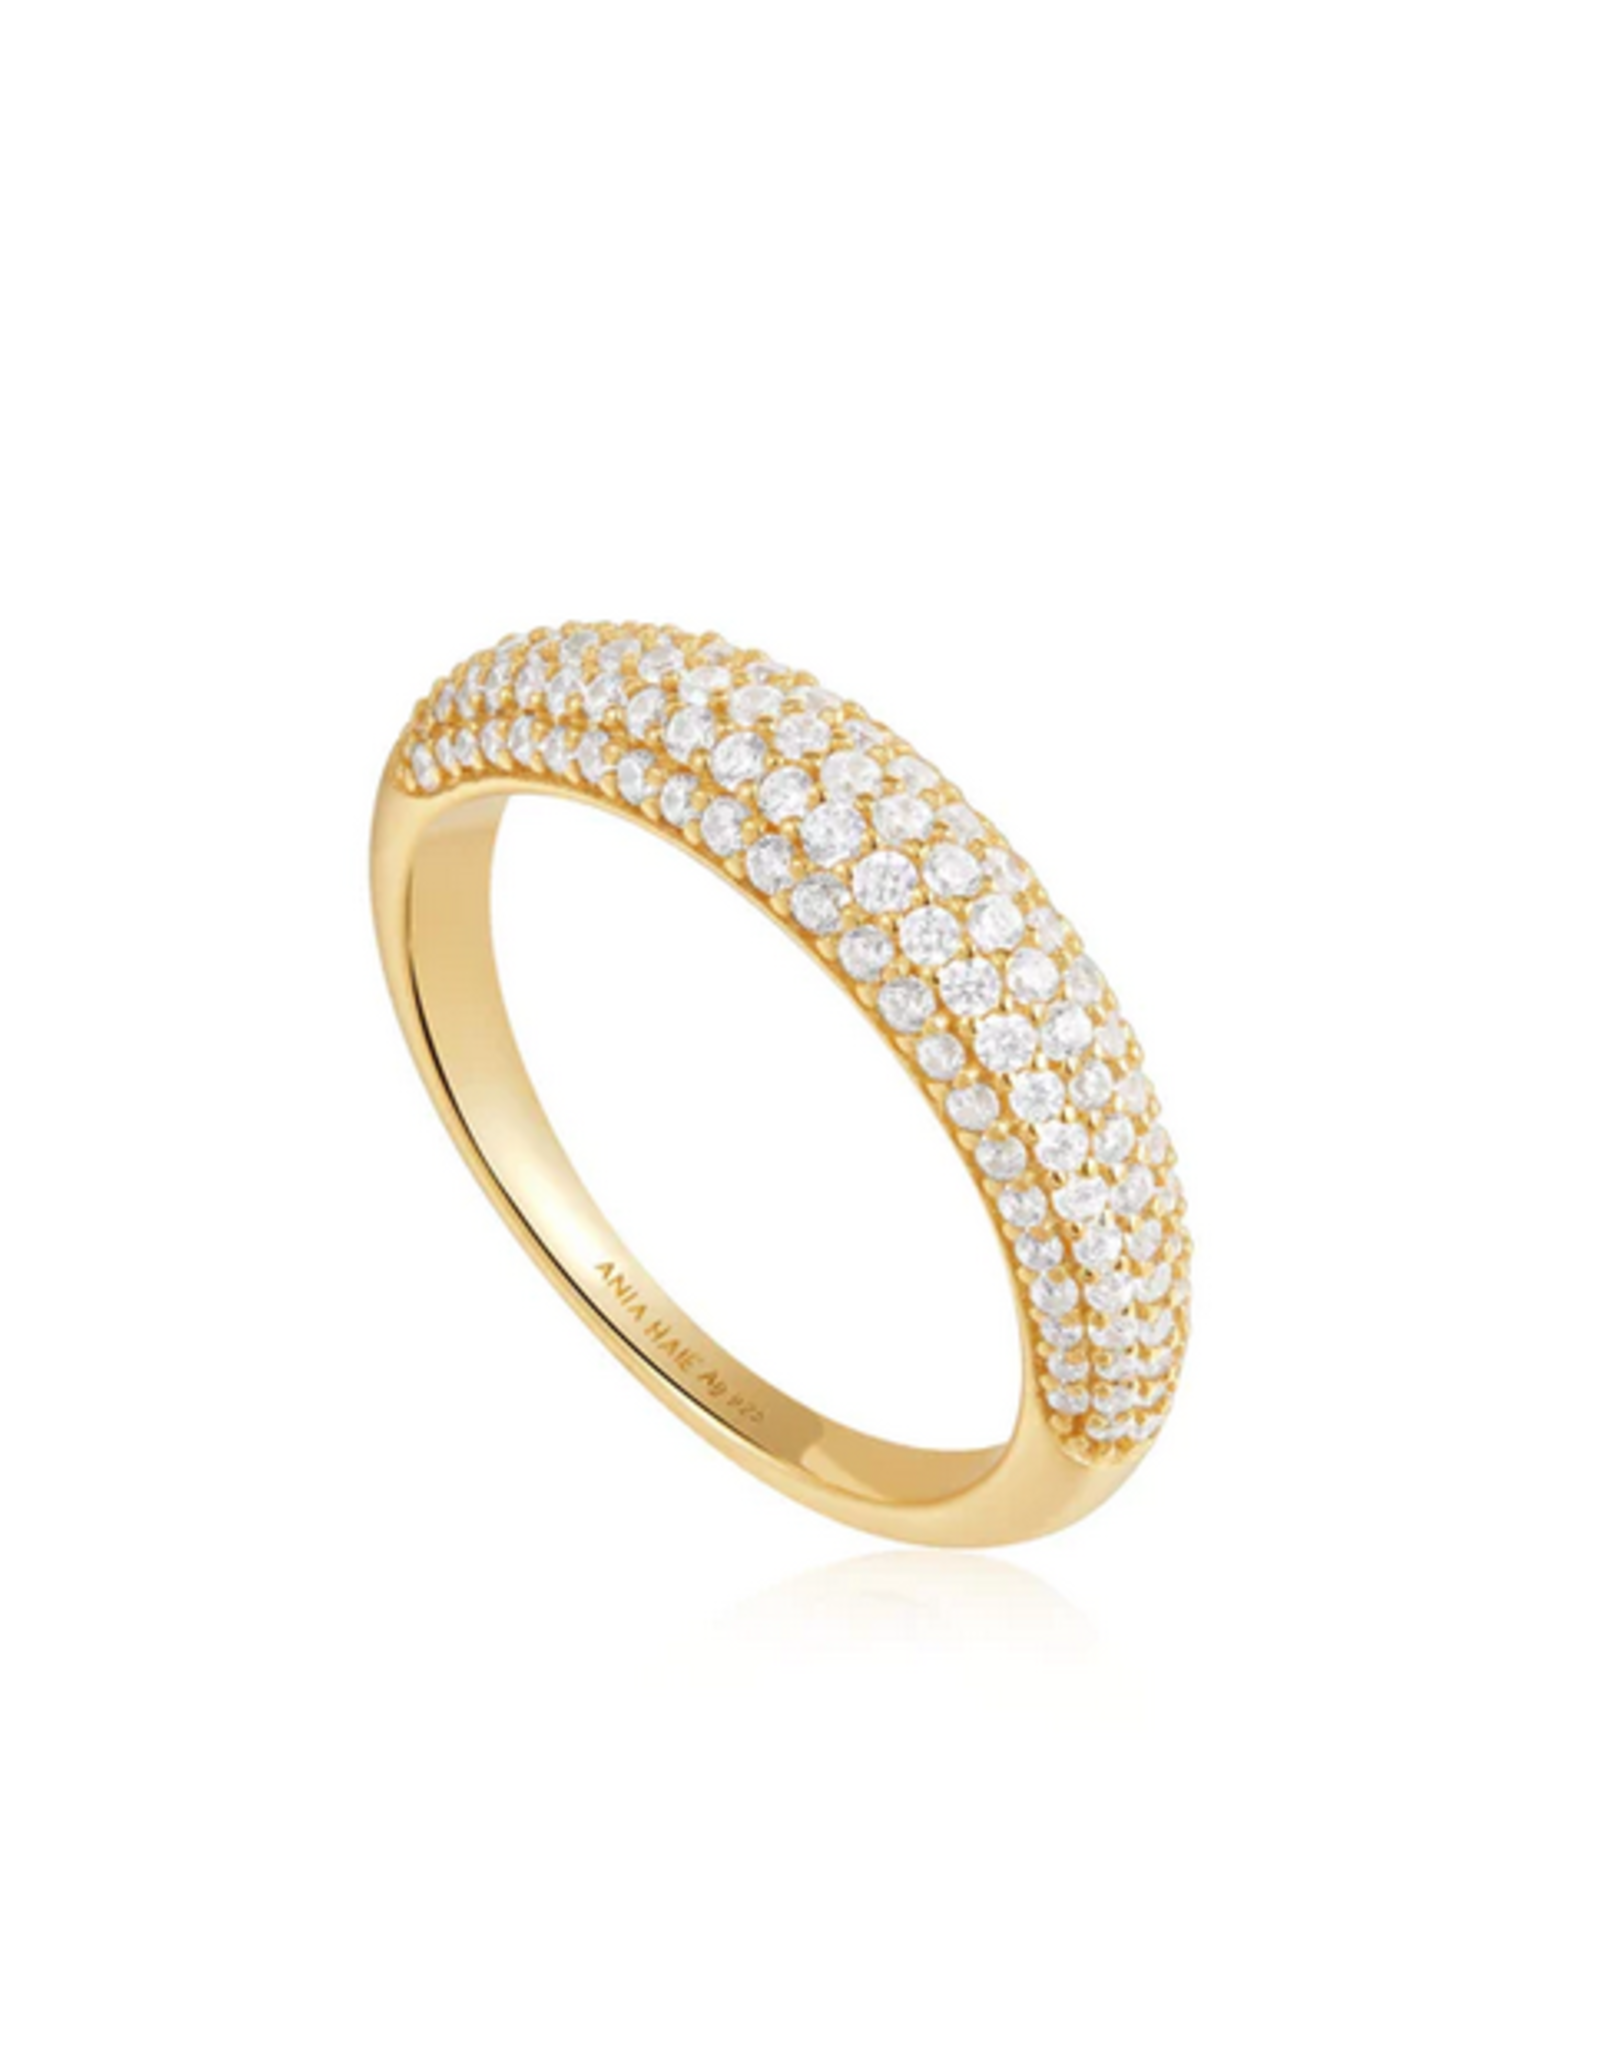 Ania Haie Ania haie - Ring gold pave dome M54